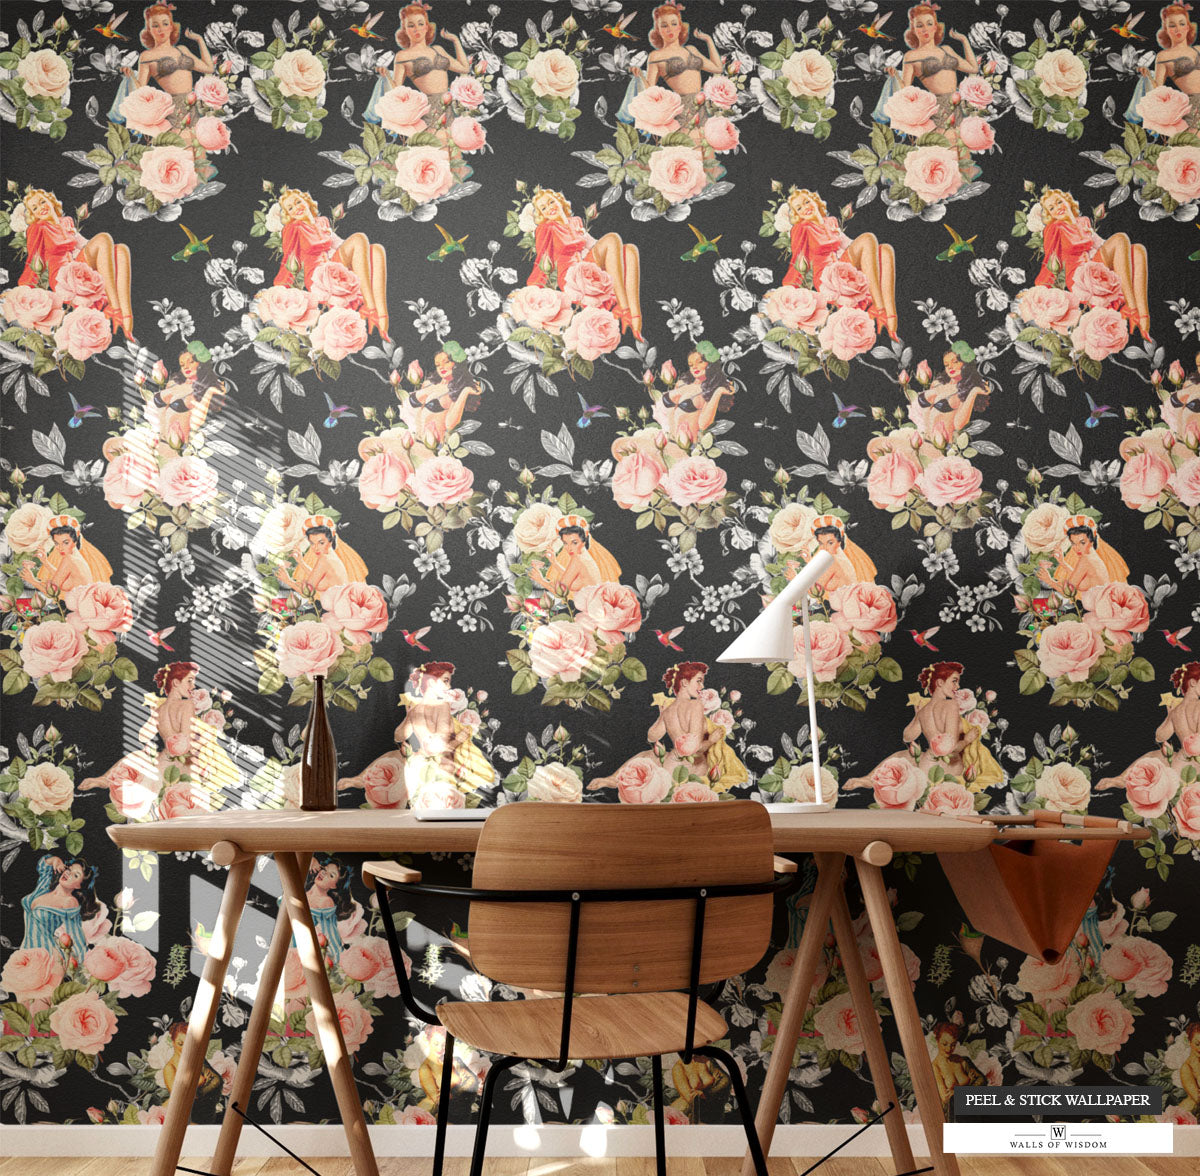 Retro-inspired peelable wallpaper with pinup girls and hummingbirds, perfect for easy decor updates.